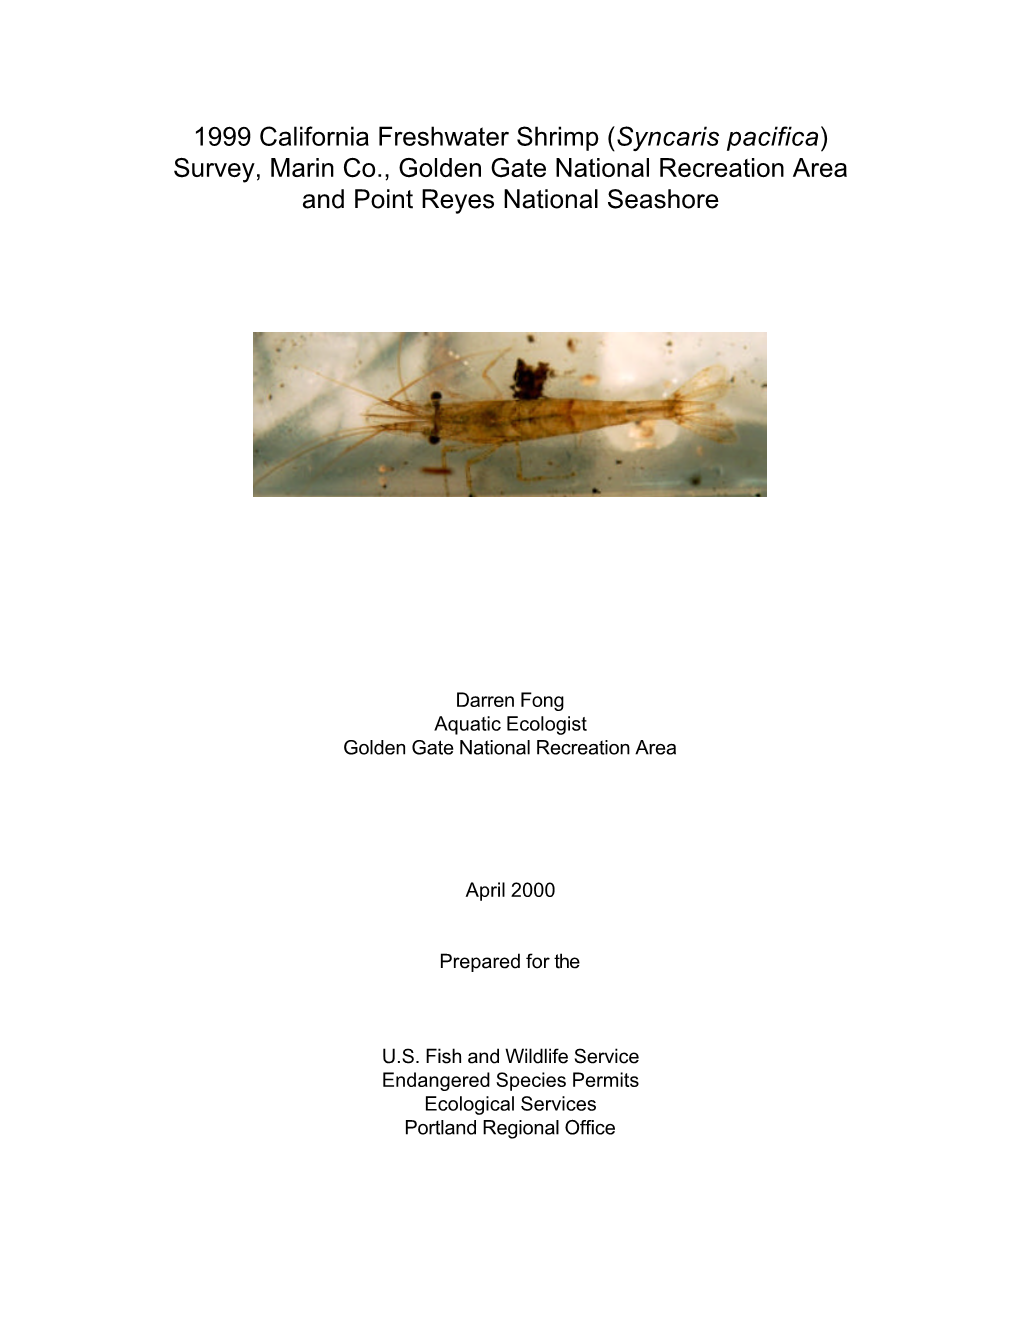 1999 California Freshwater Shrimp (Syncaris Pacifica) Survey, Marin Co., Golden Gate National Recreation Area and Point Reyes National Seashore